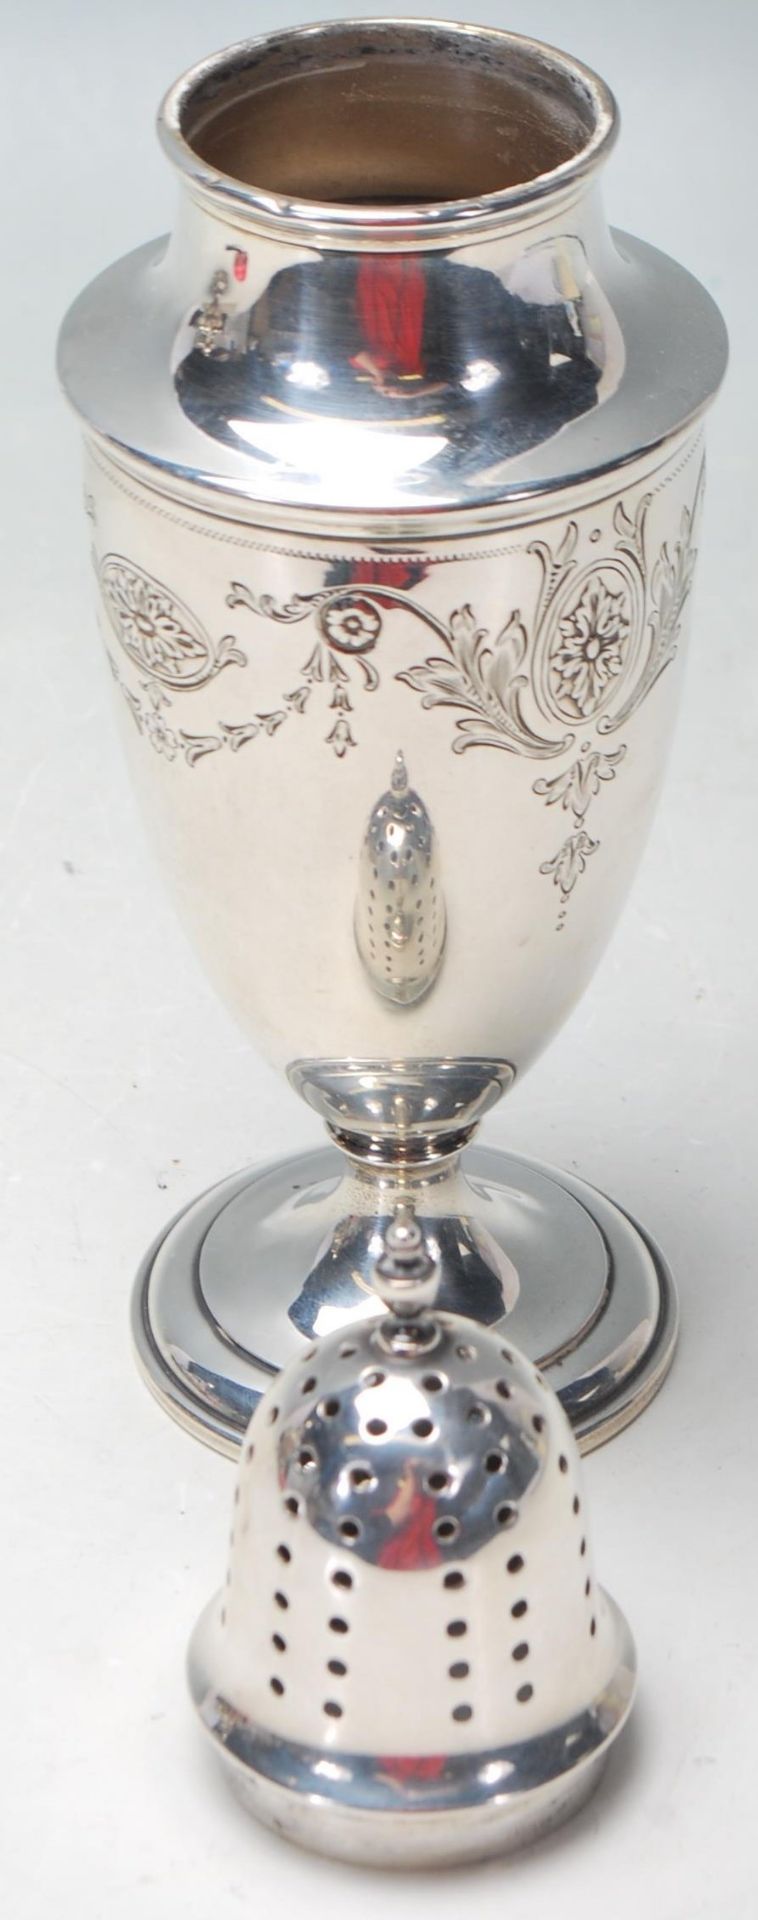 AMERICAN SILVER SUGAR SHAKER WITH REPOUSSE DECORATION - Image 5 of 6